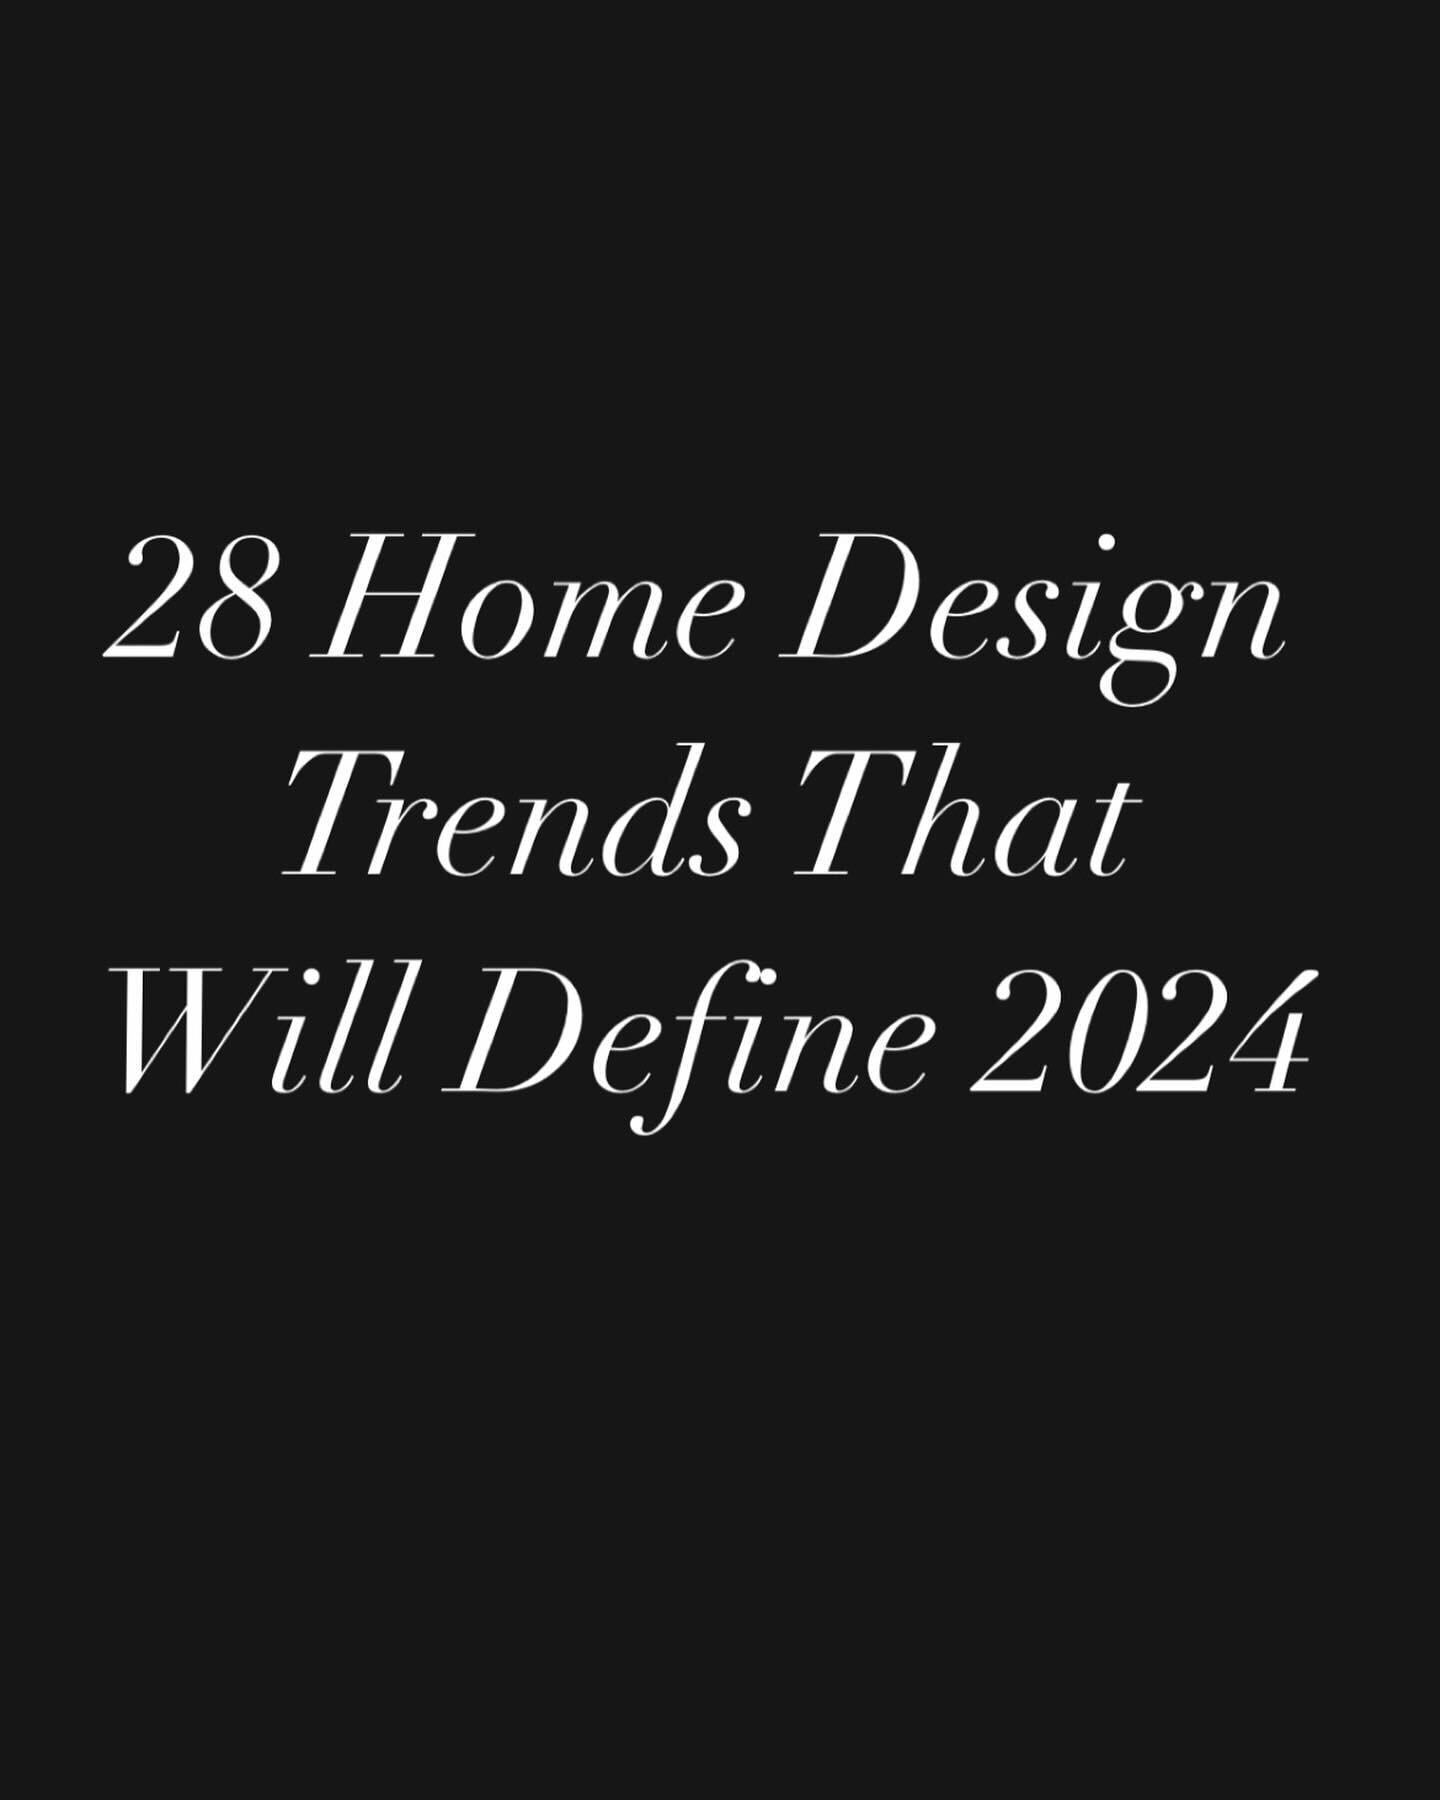 Looking for some design direction?  Here&rsquo;s some design trends for 2024 to consider!  Click the link in my bio for the full story.  Excited to be included in Houzz&rsquo;s Design Trends for 2024!  Happy New Year 🎉@houzz